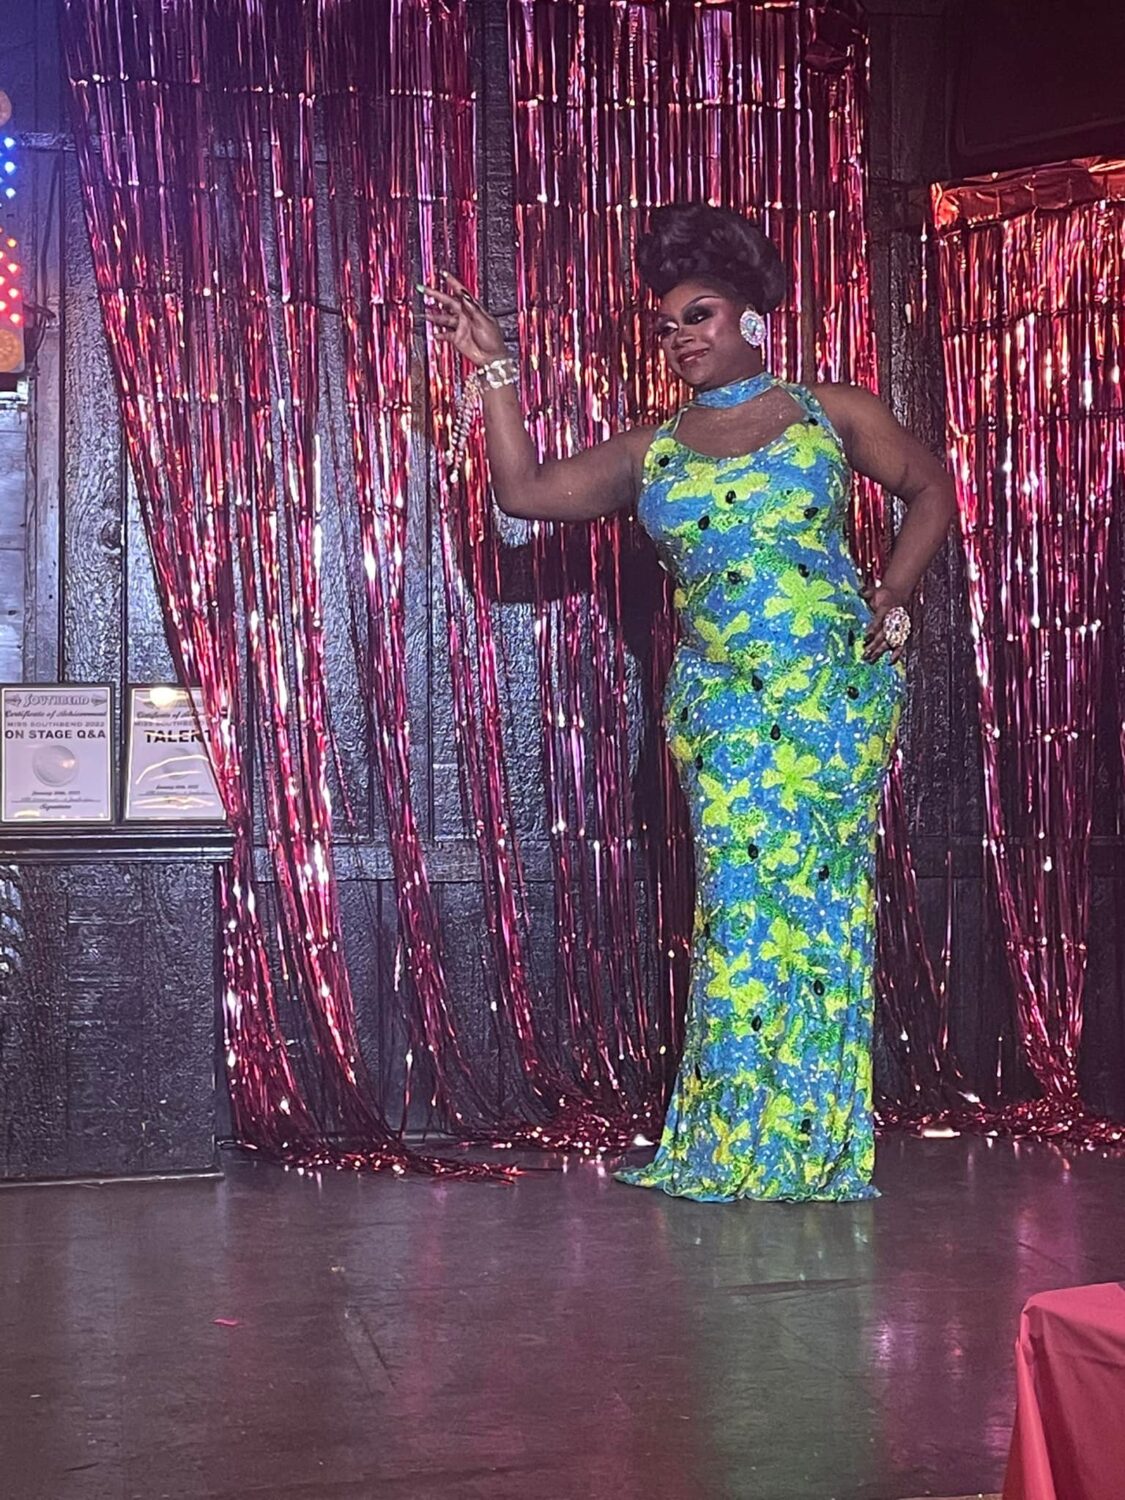 Robyn Hearts in Evening Gown Category | Miss Southbend Pageant | Southbend Tavern (Columbus, Ohio) | 1/30/2022 [Photo by Vintage Blue]